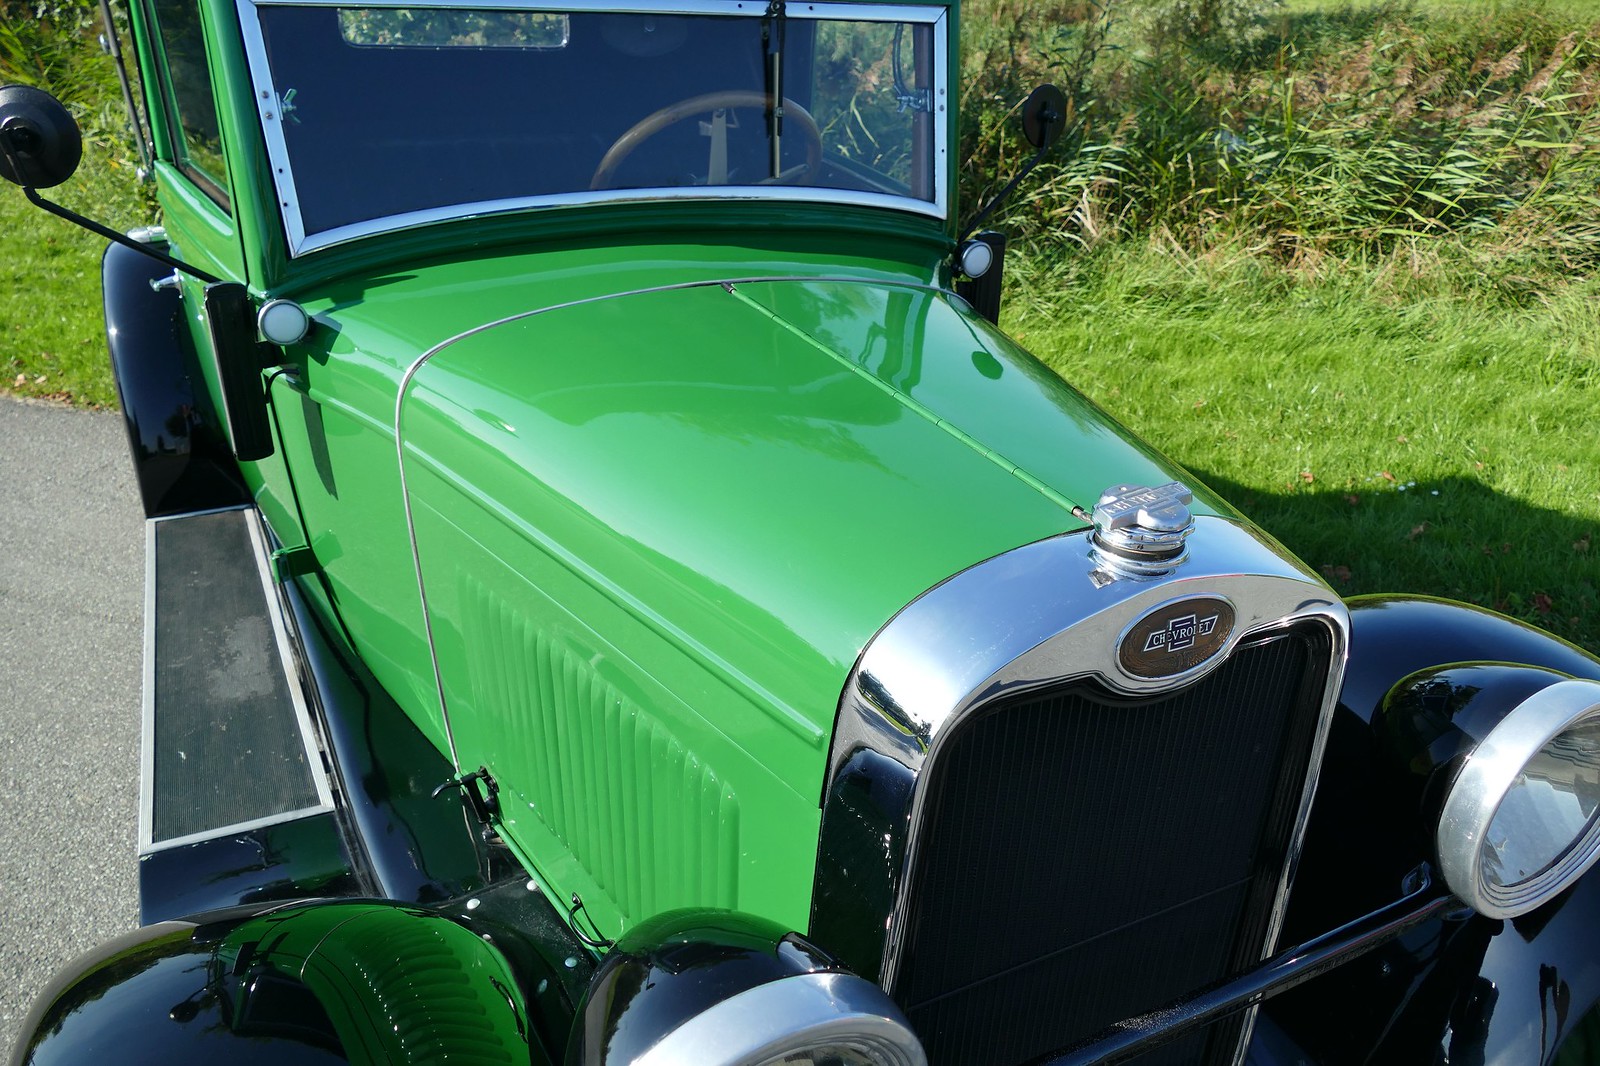 Chevrolet national ab convertible 1928